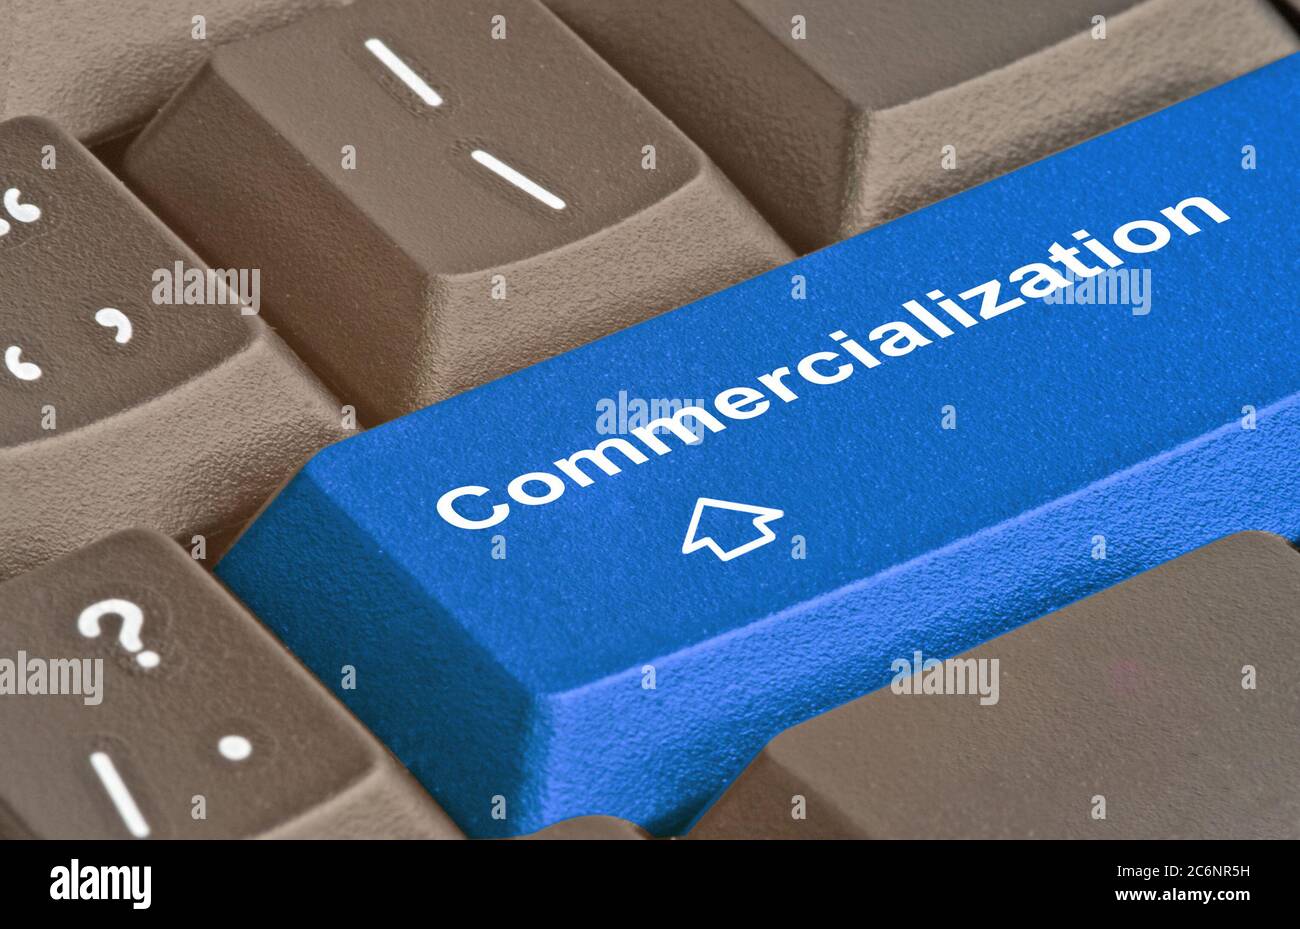 Hot blue key for commercialization Stock Photo